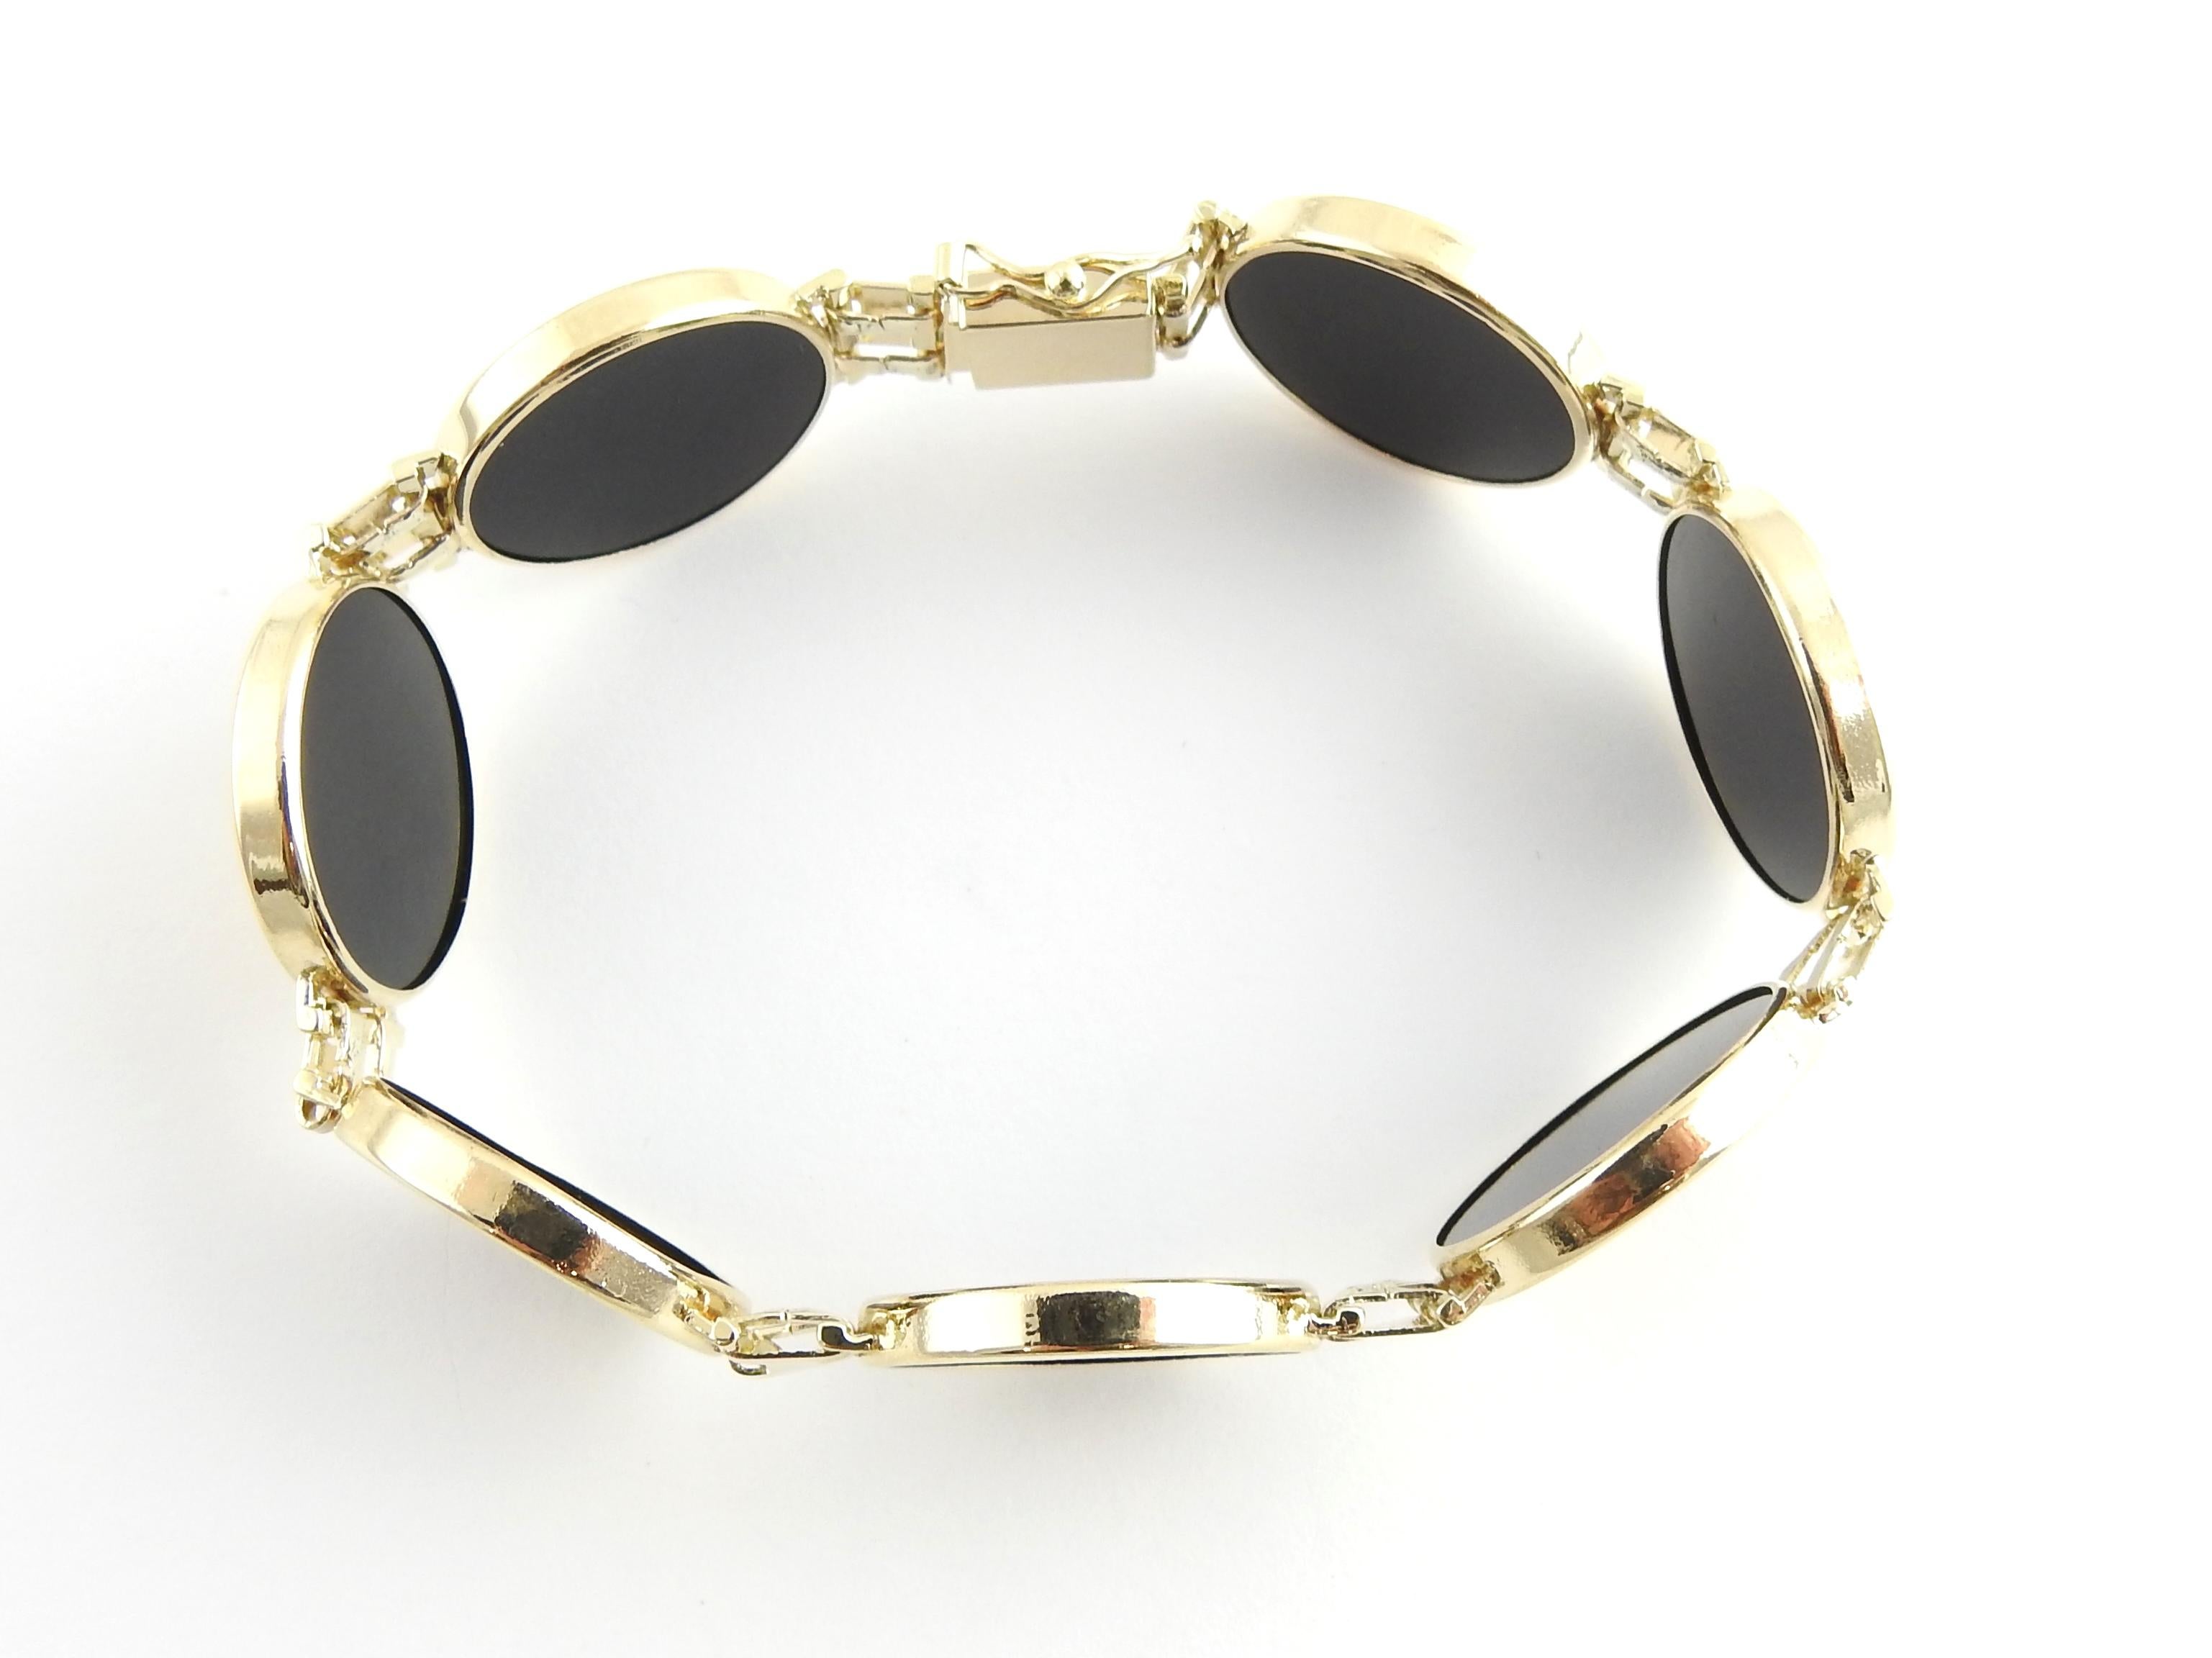 Vintage 14 Karat Yellow Gold and Onyx Panda Coin Bracelet

This lovely bracelet features seven panda coins crafted in beautifully detailed 14K yellow gold and onyx. Width: 19 mm.

Size: 7 inches

Weight: 9.0 dwt. / 29.6 gr.

Stamped: 14K

Very good